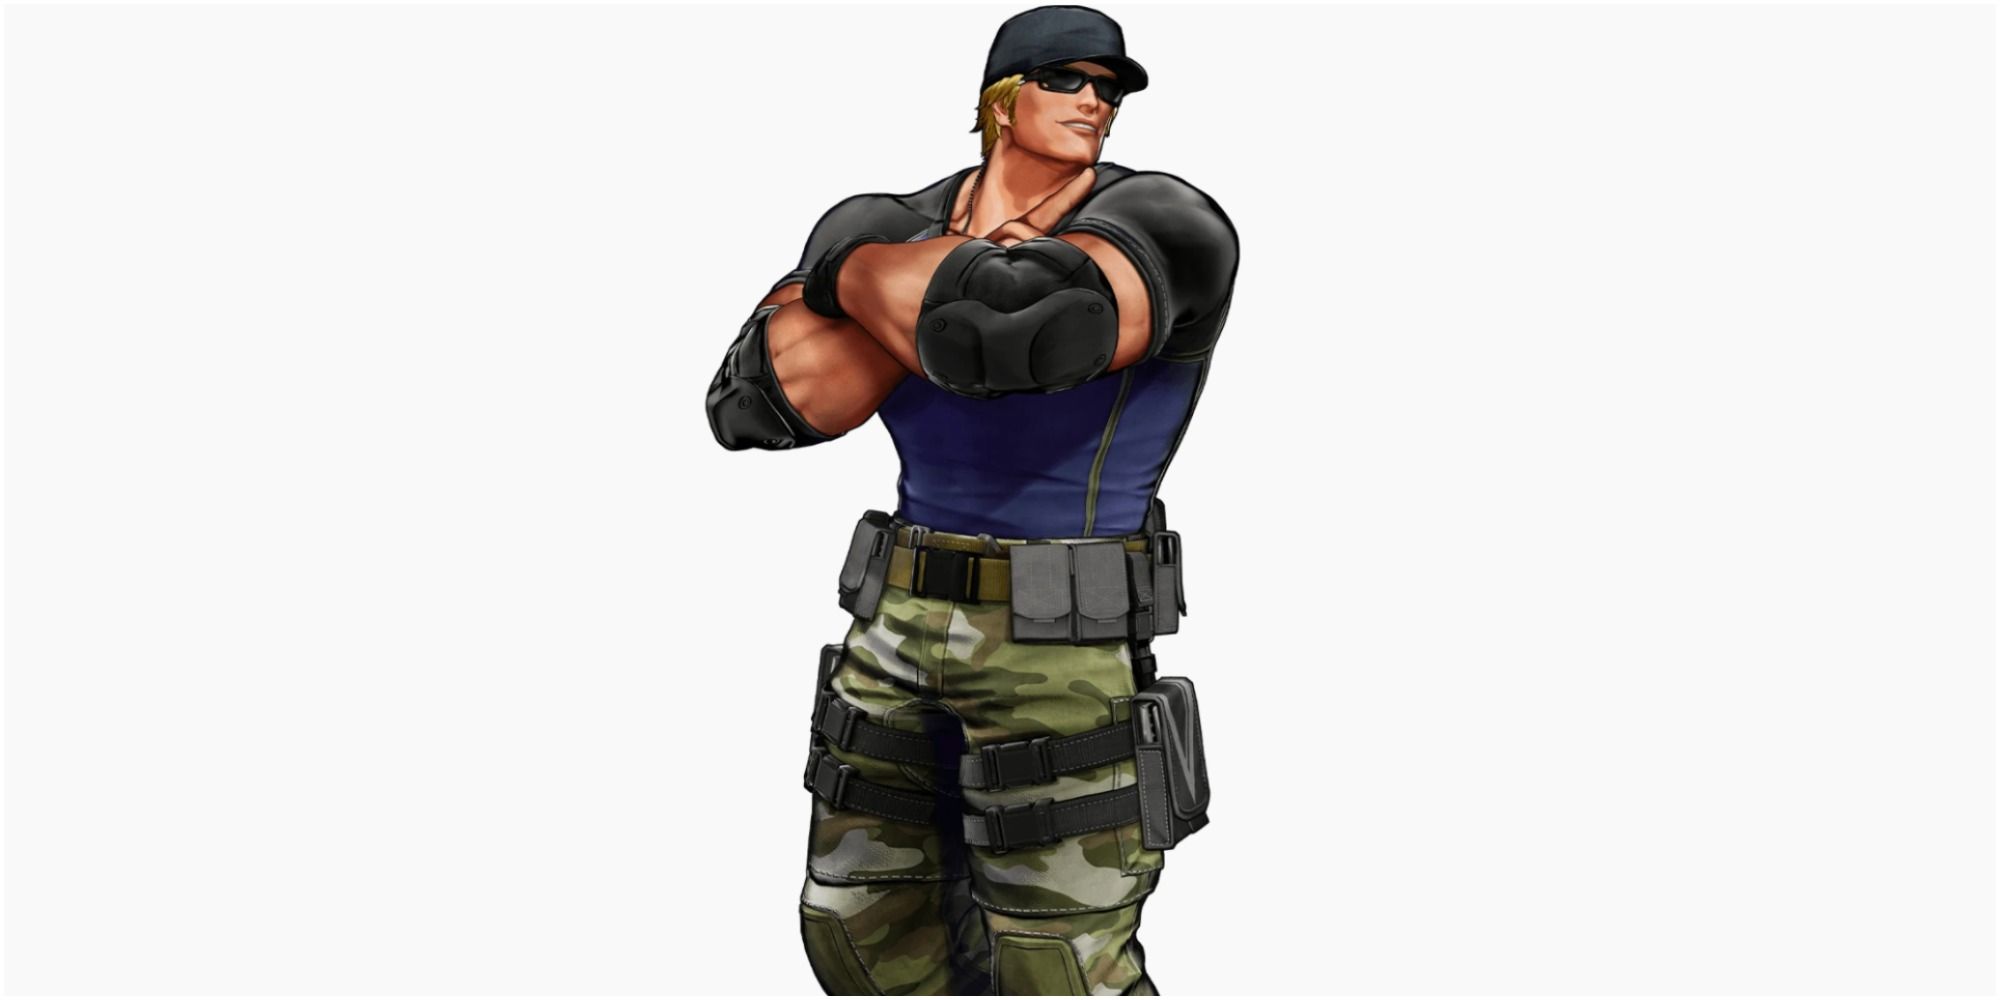 Clark Still from the King Of Fighters series